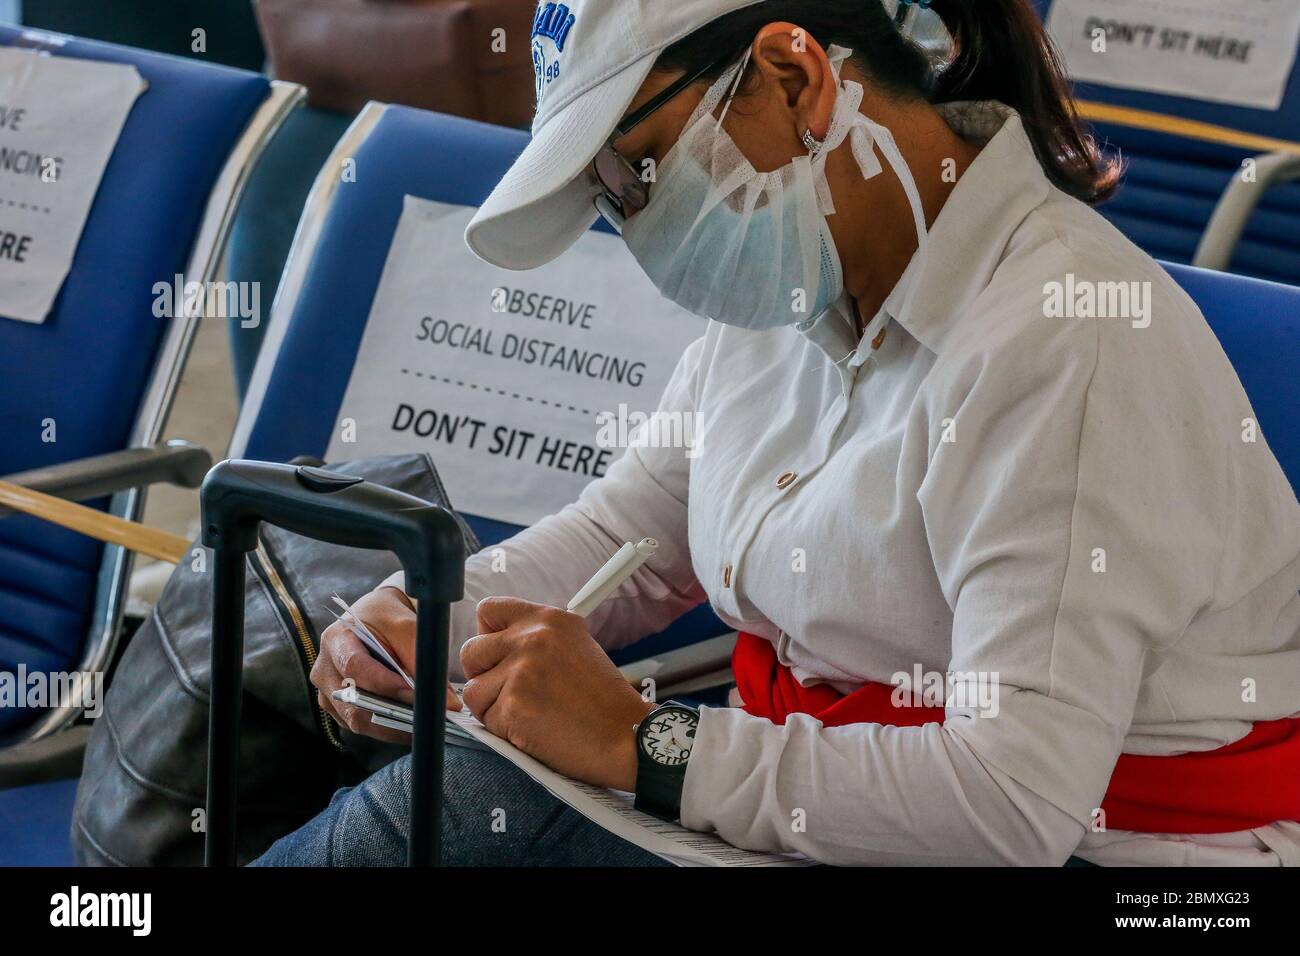 Manila. 11th May, 2020. A Filipino returning from London fills out a form after arriving at the Manila Ninoy Aquino International Airport in the Philippines, May 11, 2020. All foreigners and Filipinos arriving in the Philippines need to undergo testing for the COVID-19 and quarantine to stem the spread of the virus, Presidential spokesperson Harry Roque said on Monday. Credit: Rouelle Umali/Xinhua/Alamy Live News Stock Photo